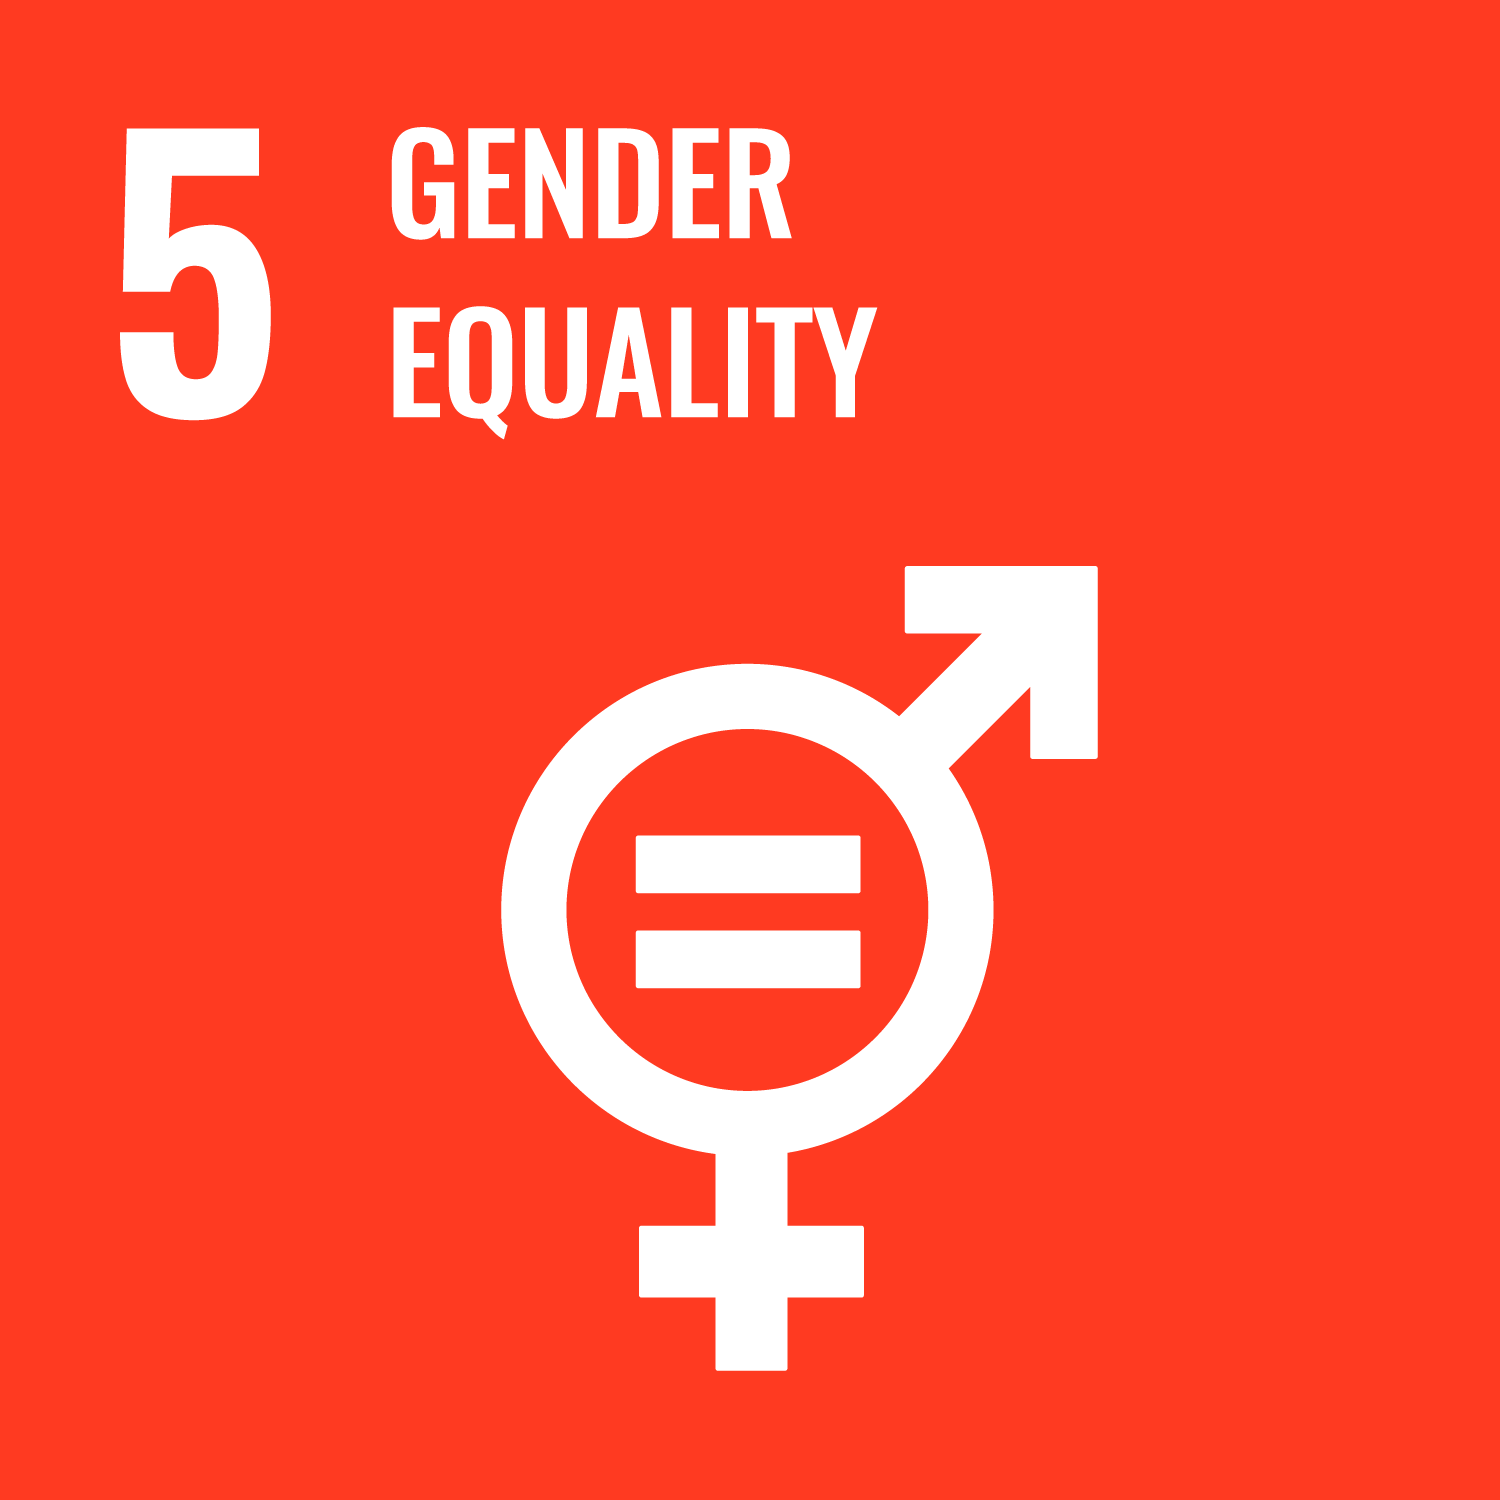 On an orange background, white text reads "5. Gender equality". Beneath this is an illustration of a circle with an arrow pointing top left and a plus sign pointing downwards. In the centre of the circle is an equal sign.